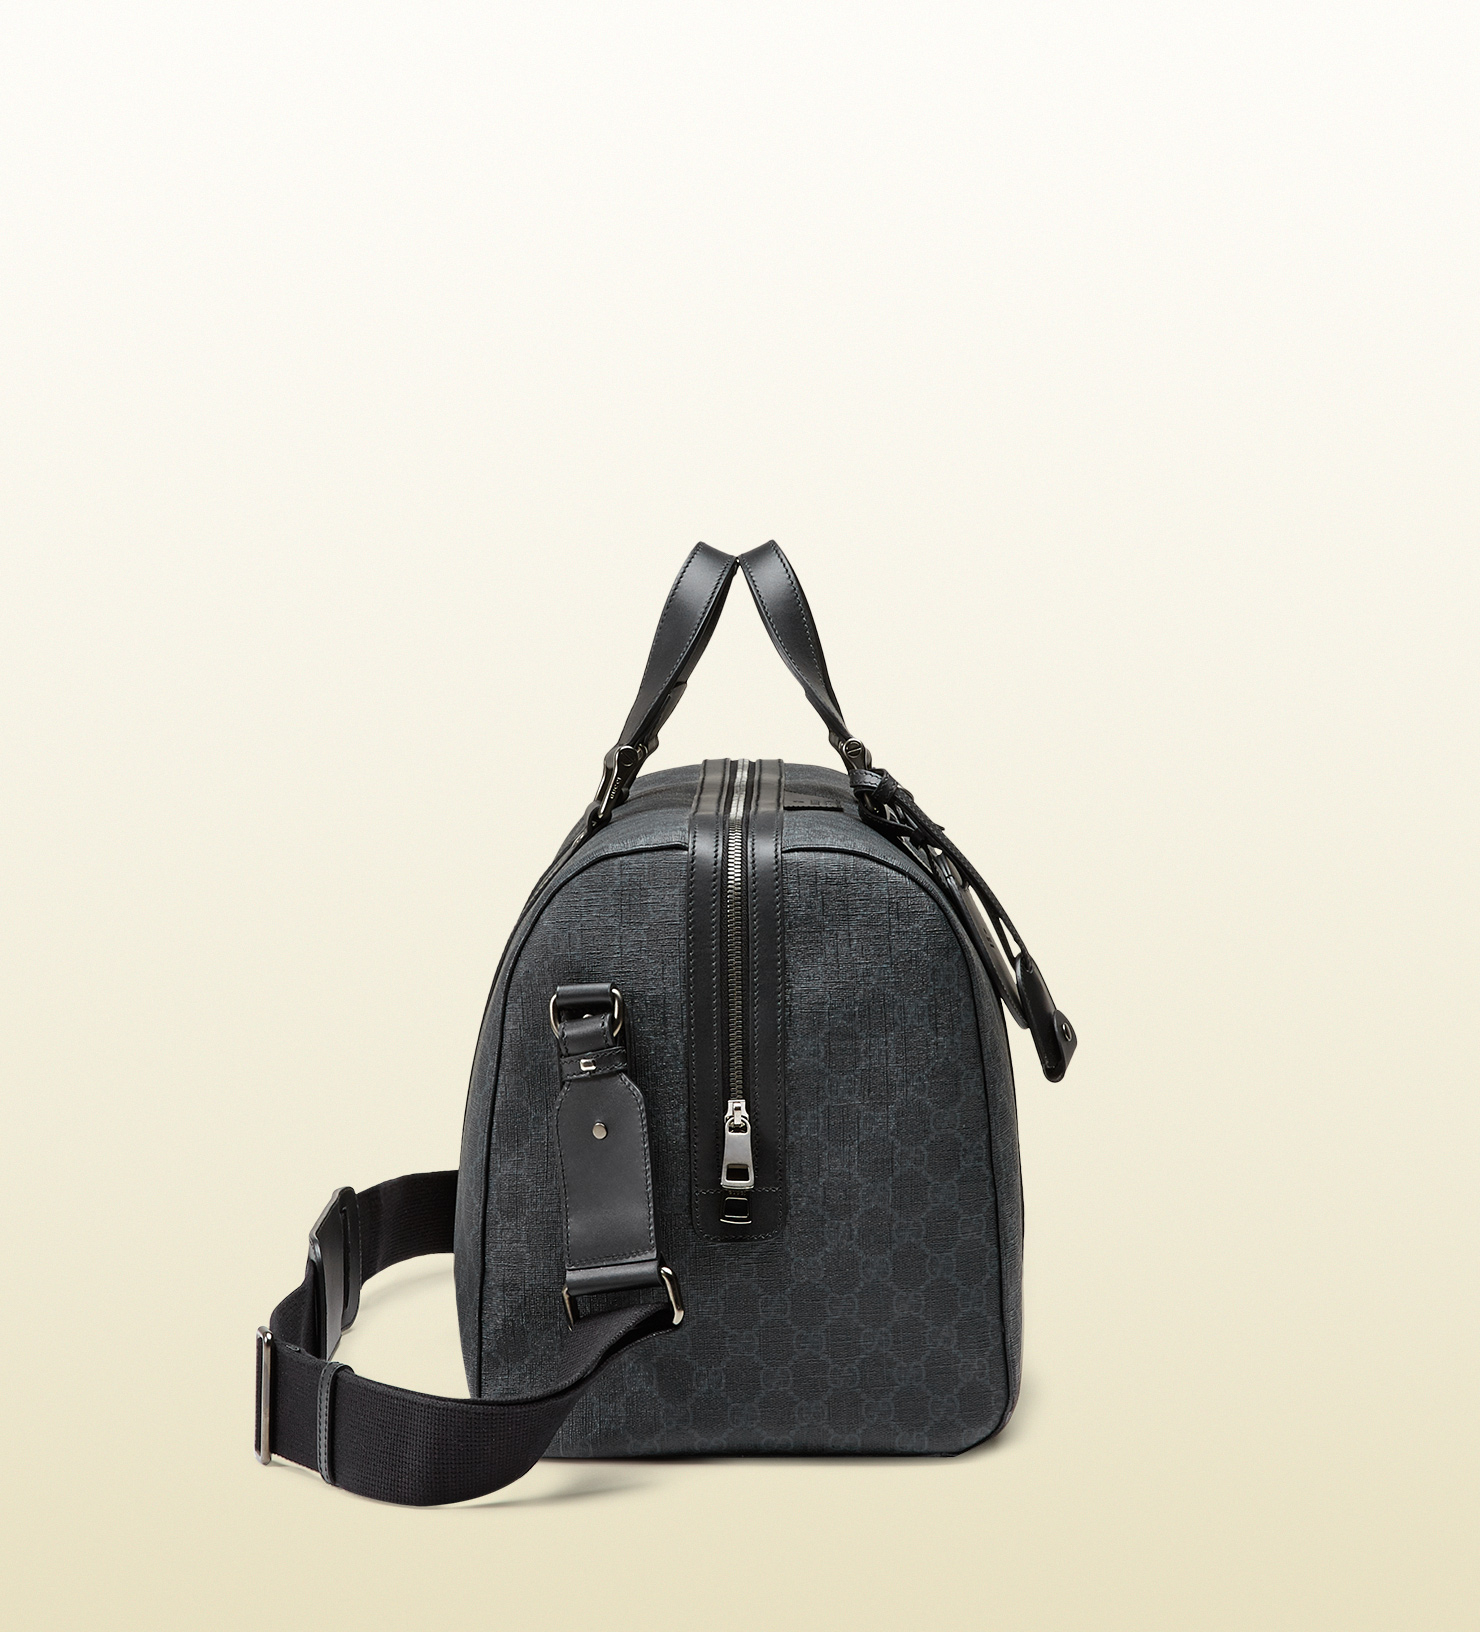 Gucci Gg Supreme Canvas Carry-on Duffle Bag in Black for Men | Lyst UK